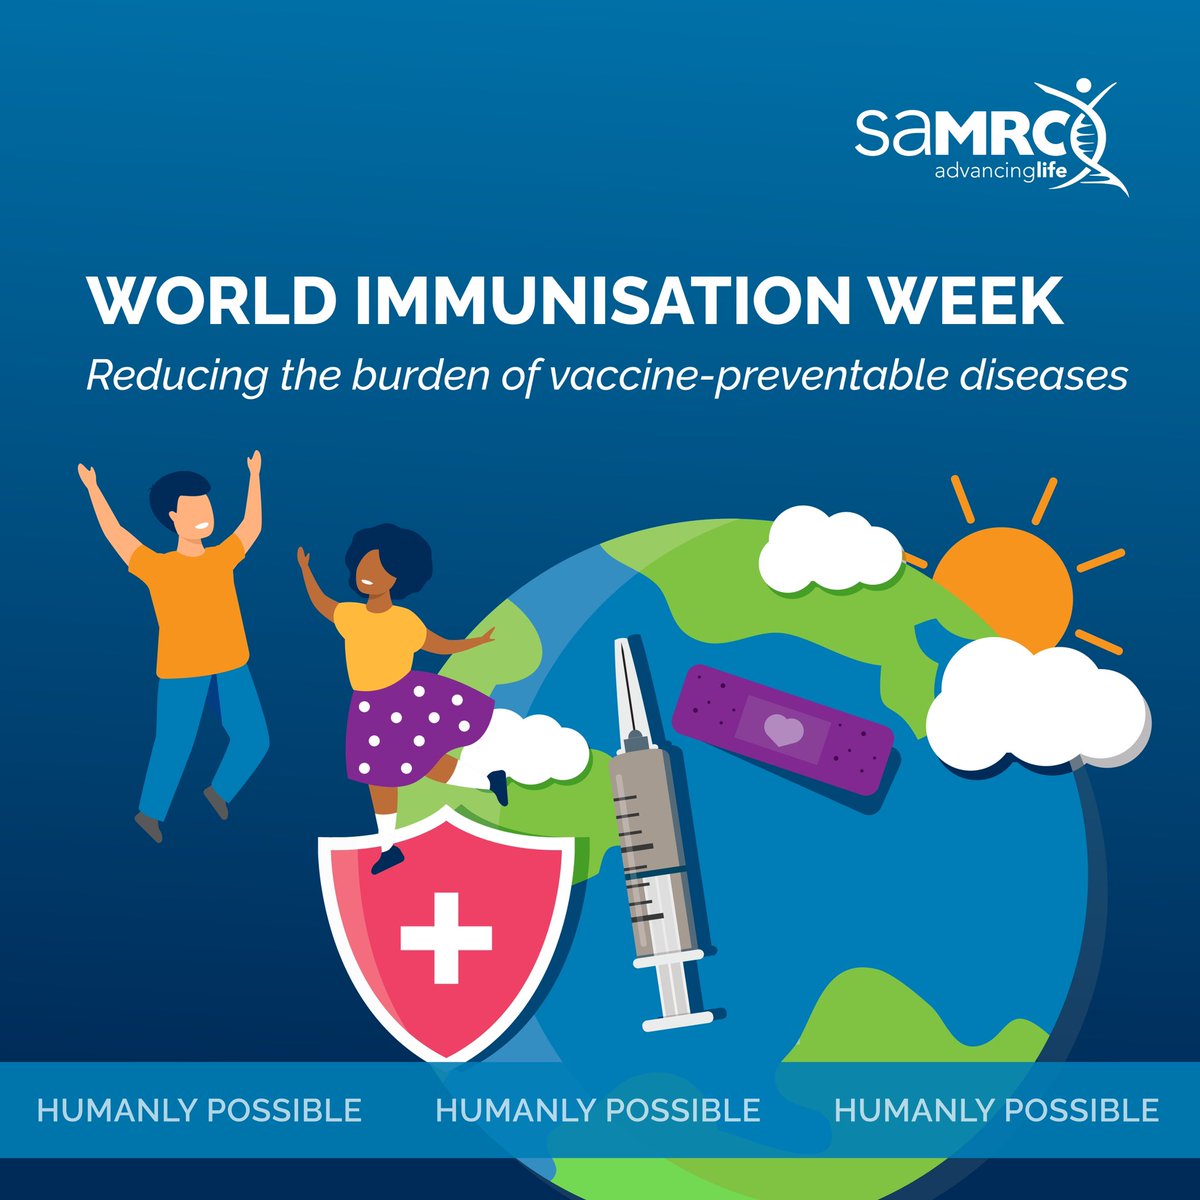 The Vaccine Implementation Research portfolio, led by SAMRCs Cochrane SA, generates high-quality evidence to guide policy & practice for health conditions, including vaccination. Identifying obstacles to vaccine adoption & implementing interventions. #WorldImmunizationWeek